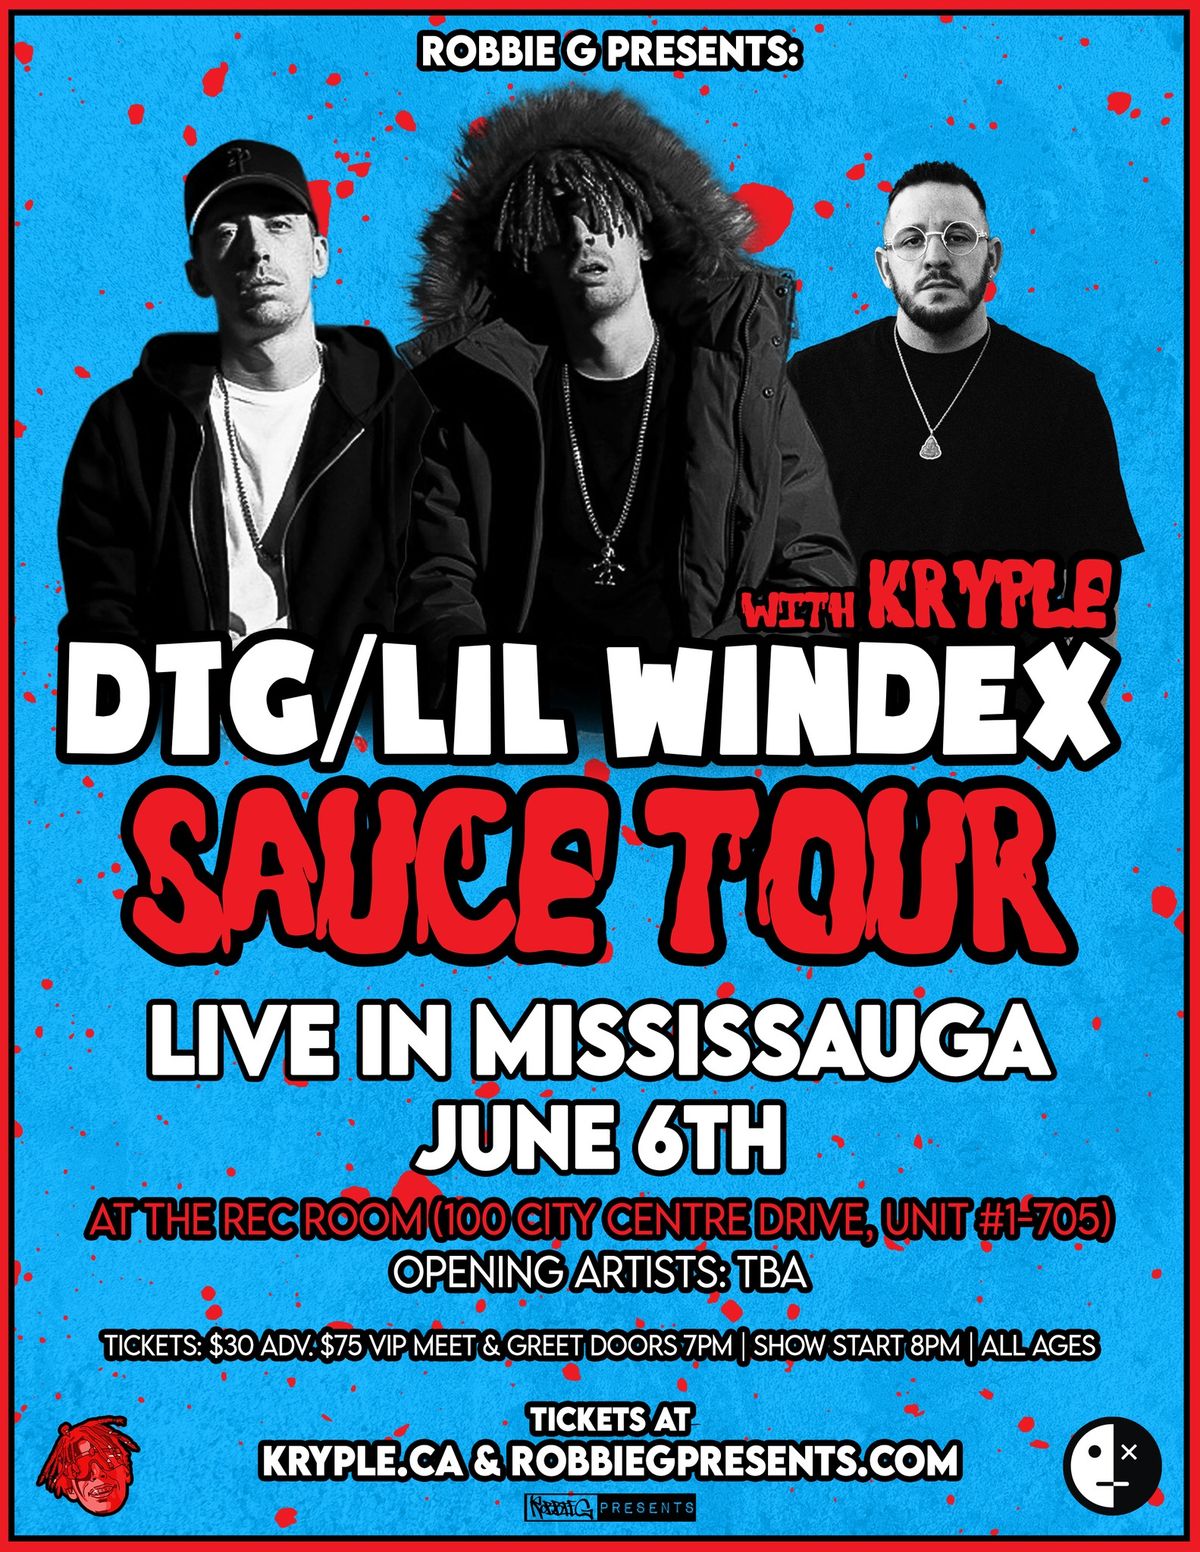 DTG\/Lil Windex Live in Mississauga June 6th at The Rec Room w\/Kryple